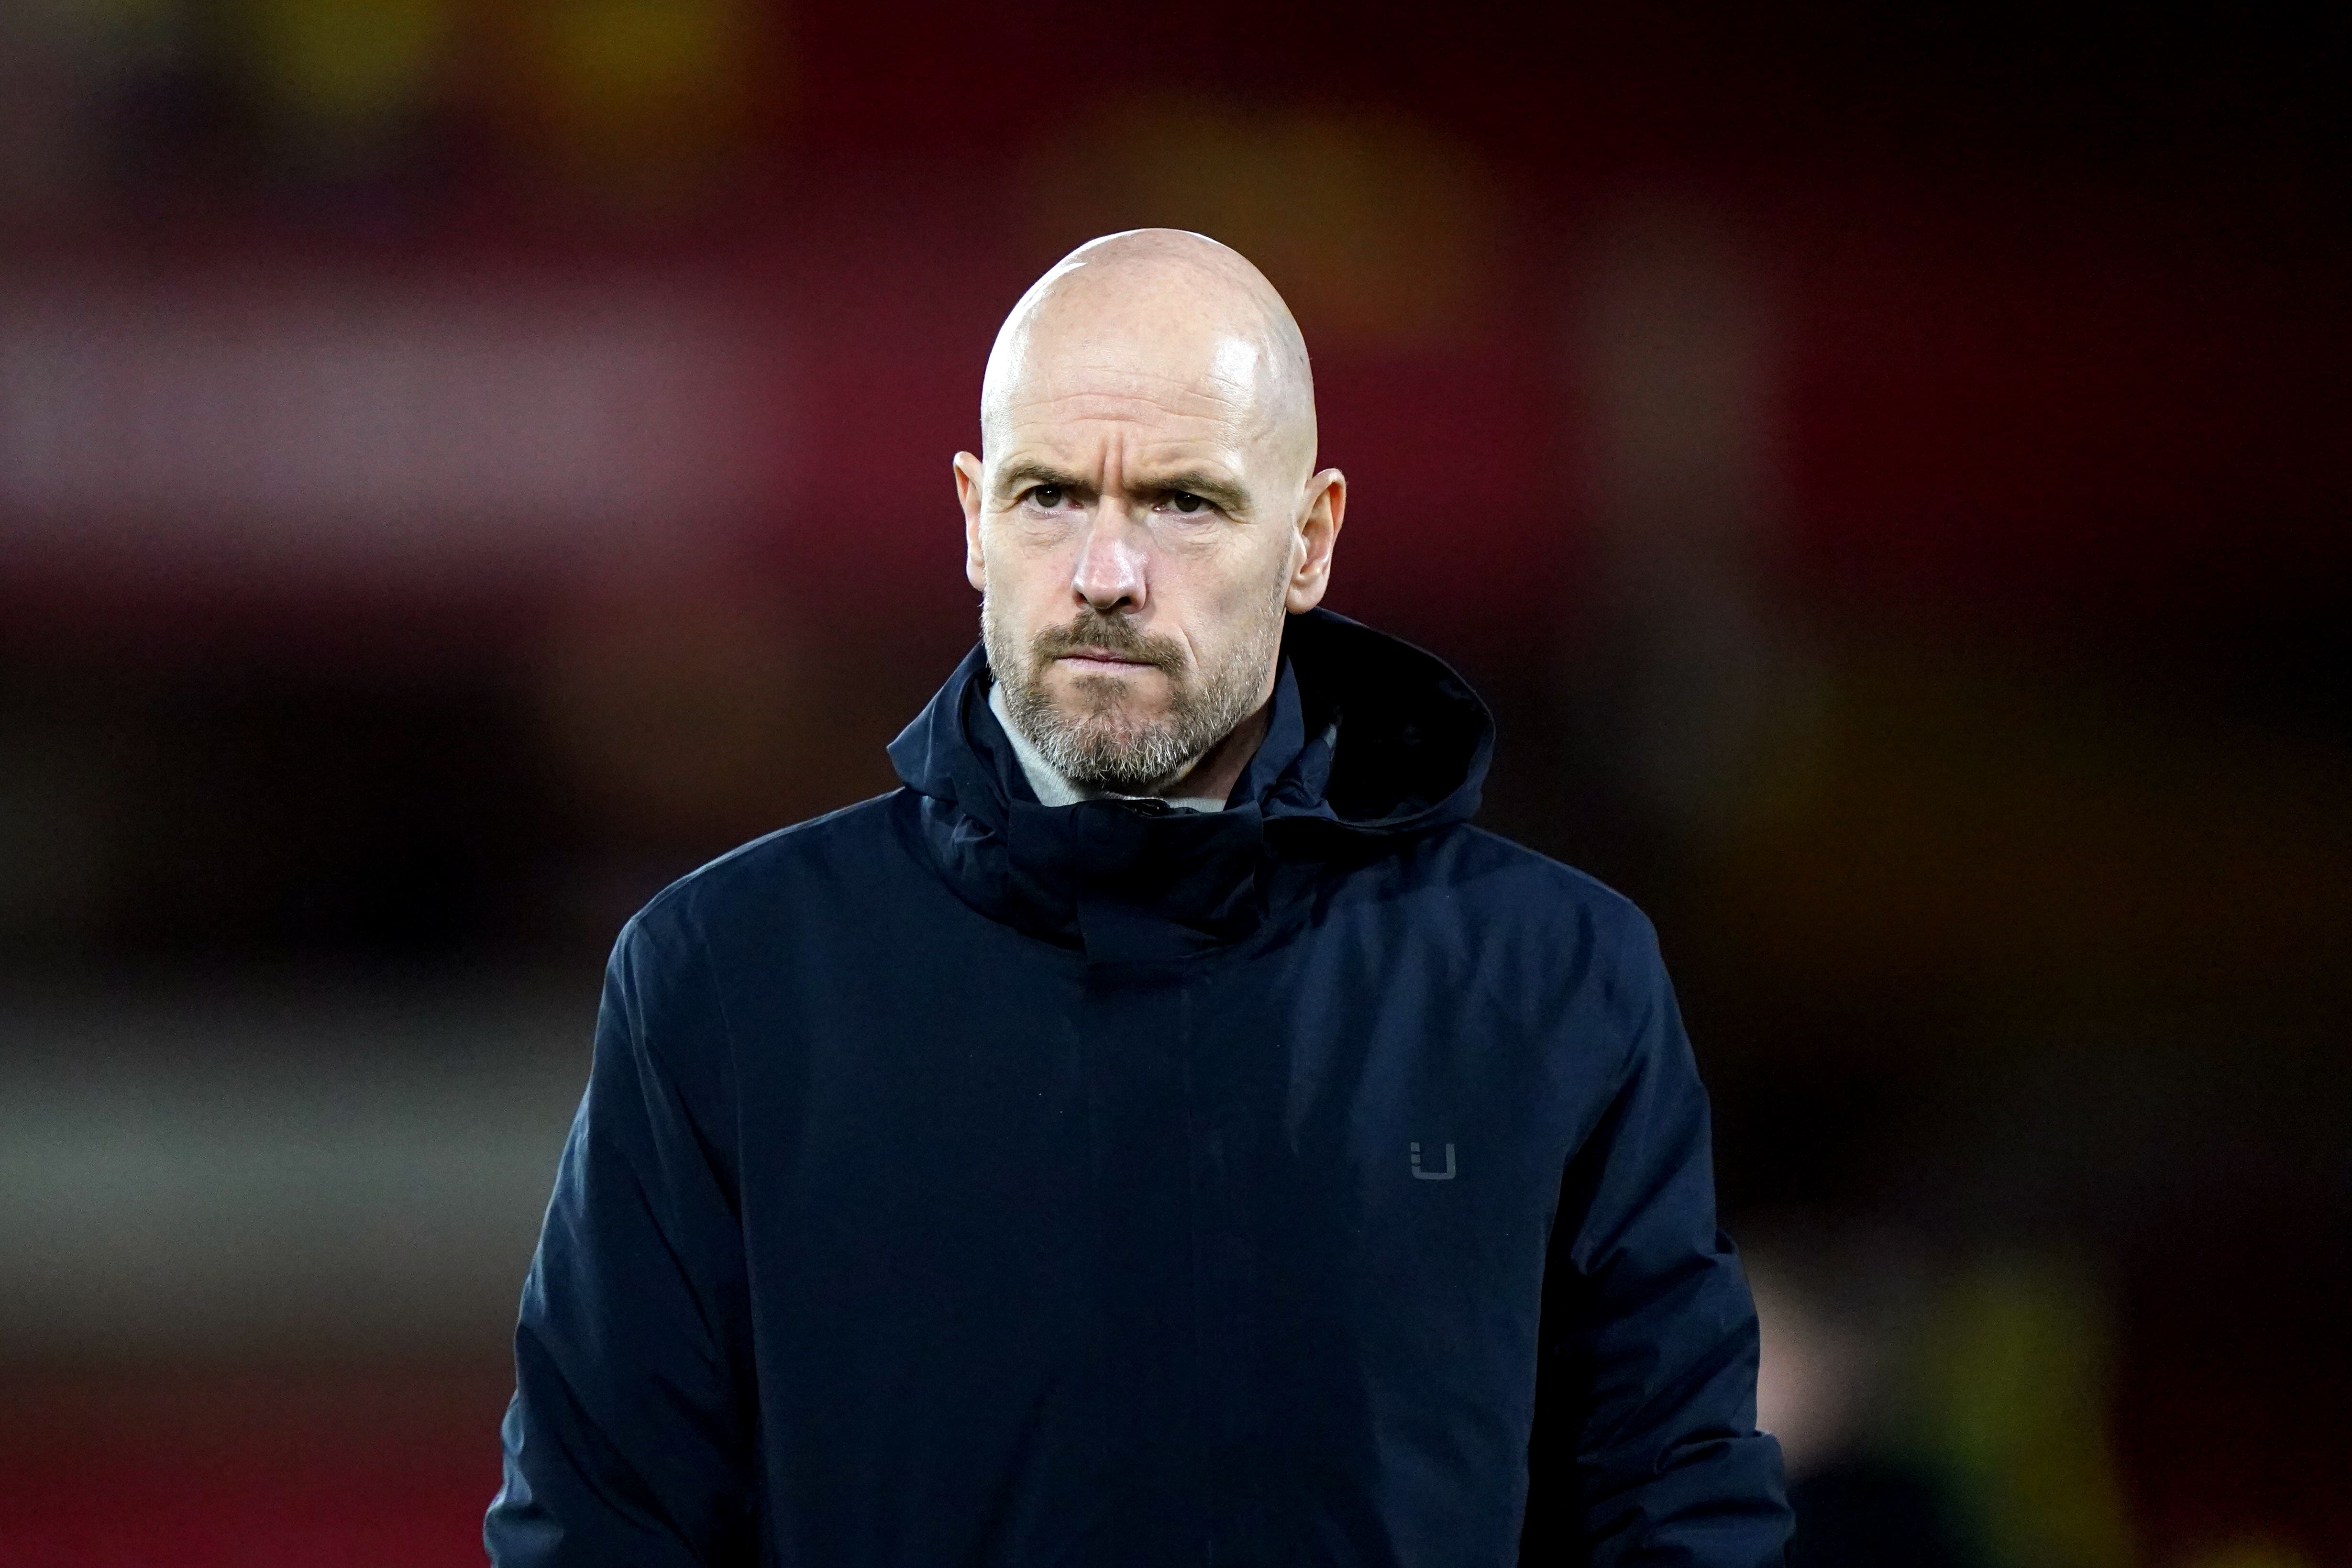 Erik ten Hag did not say if he wanted Mason Greenwood to play for Manchester United